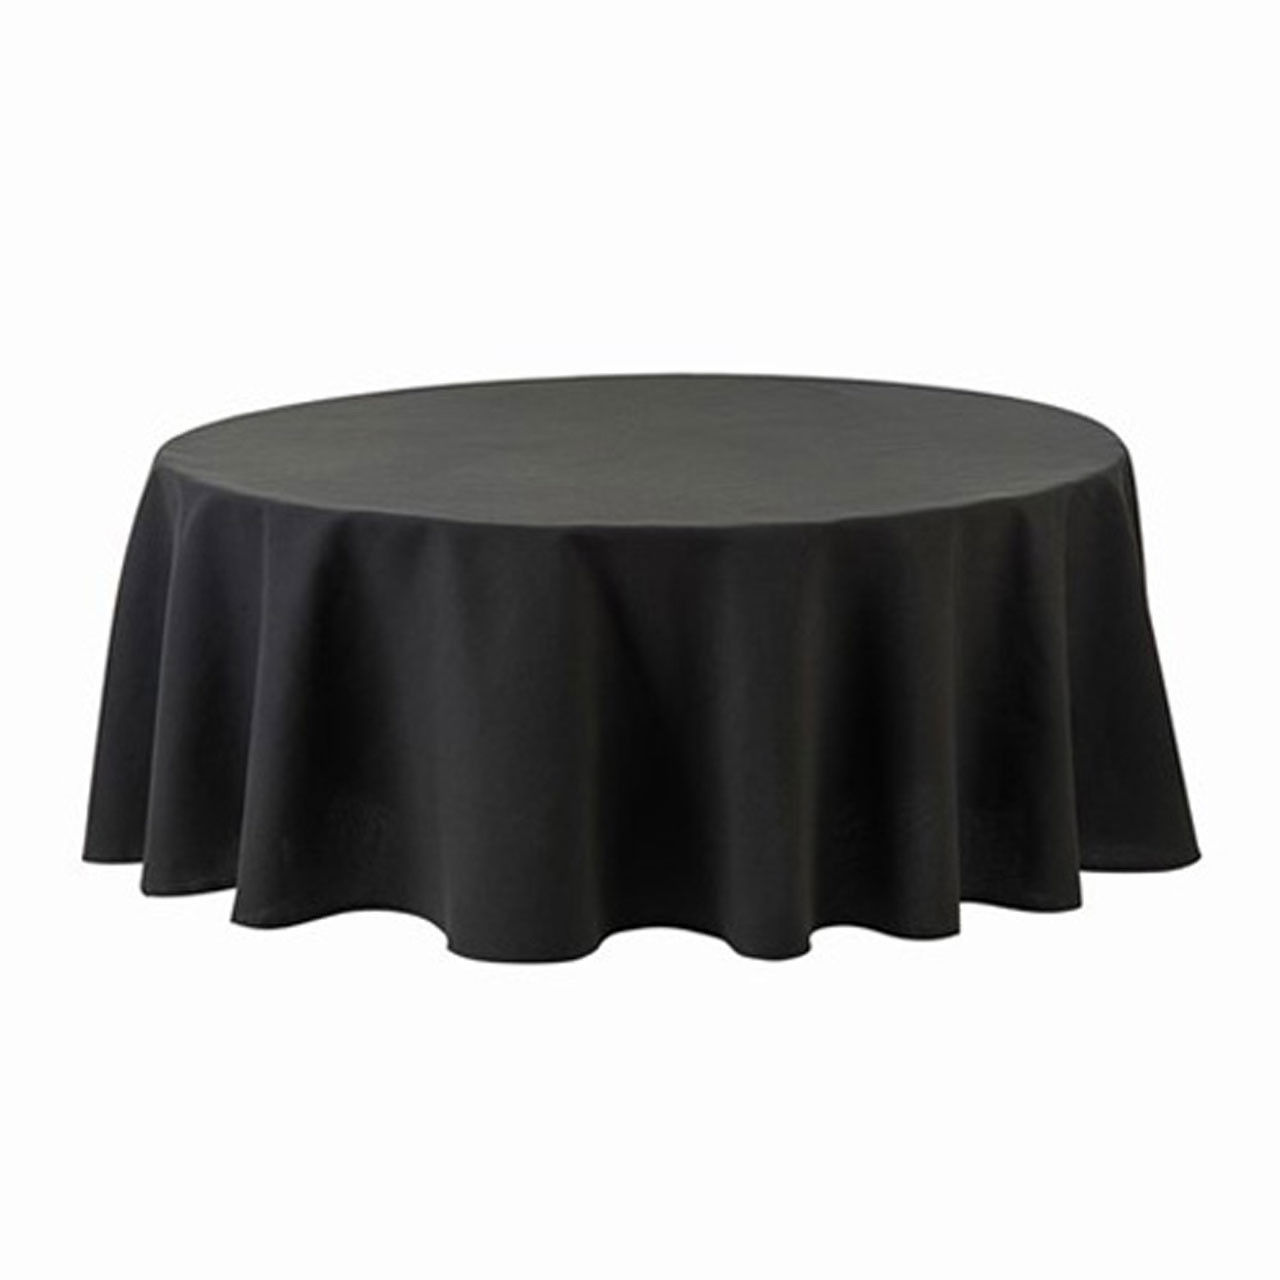 Does the black round tablecloth have a certain finish?